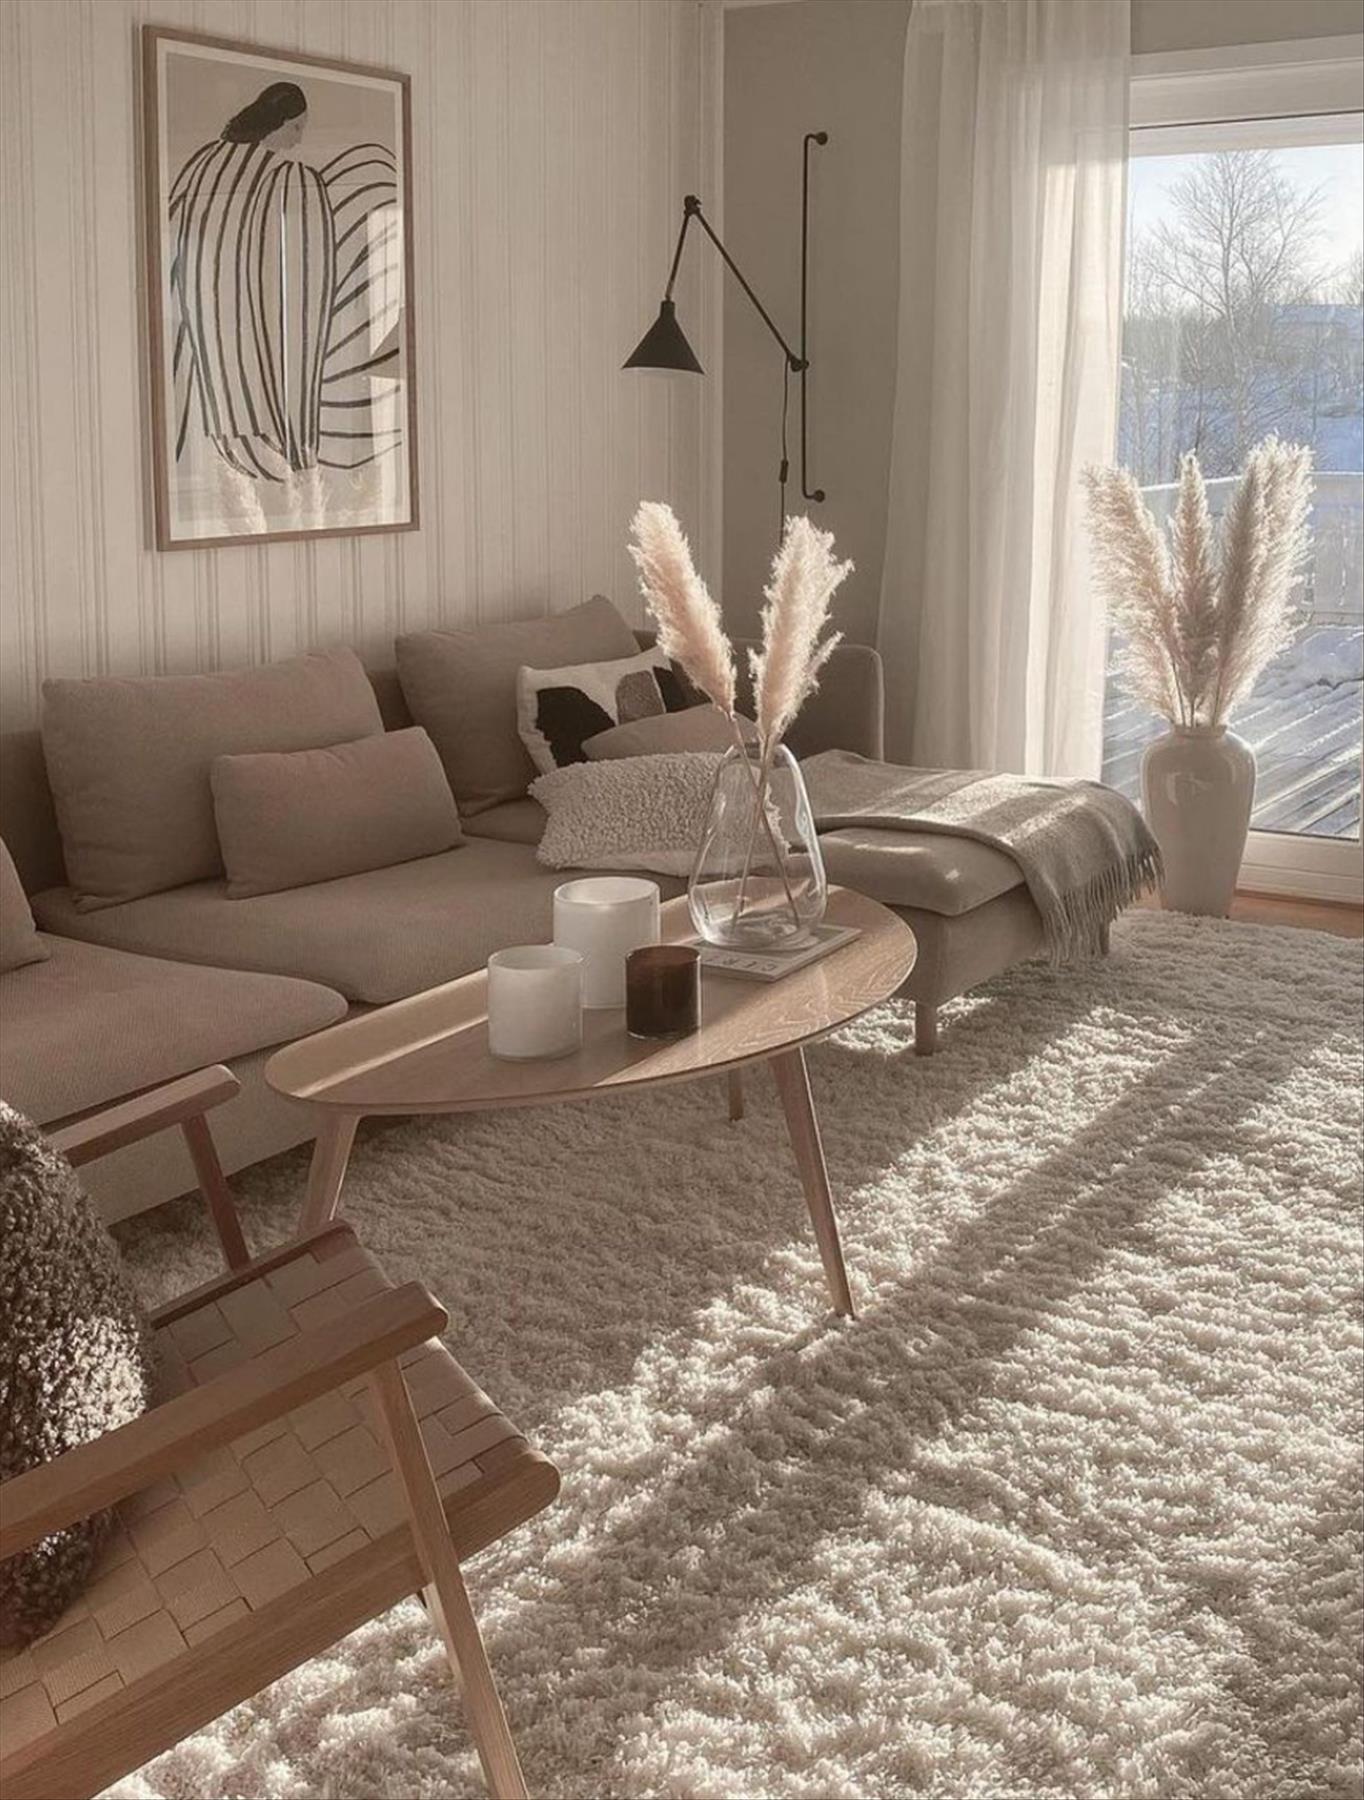 Cozy bohemian living room decorations inspiration for Summer